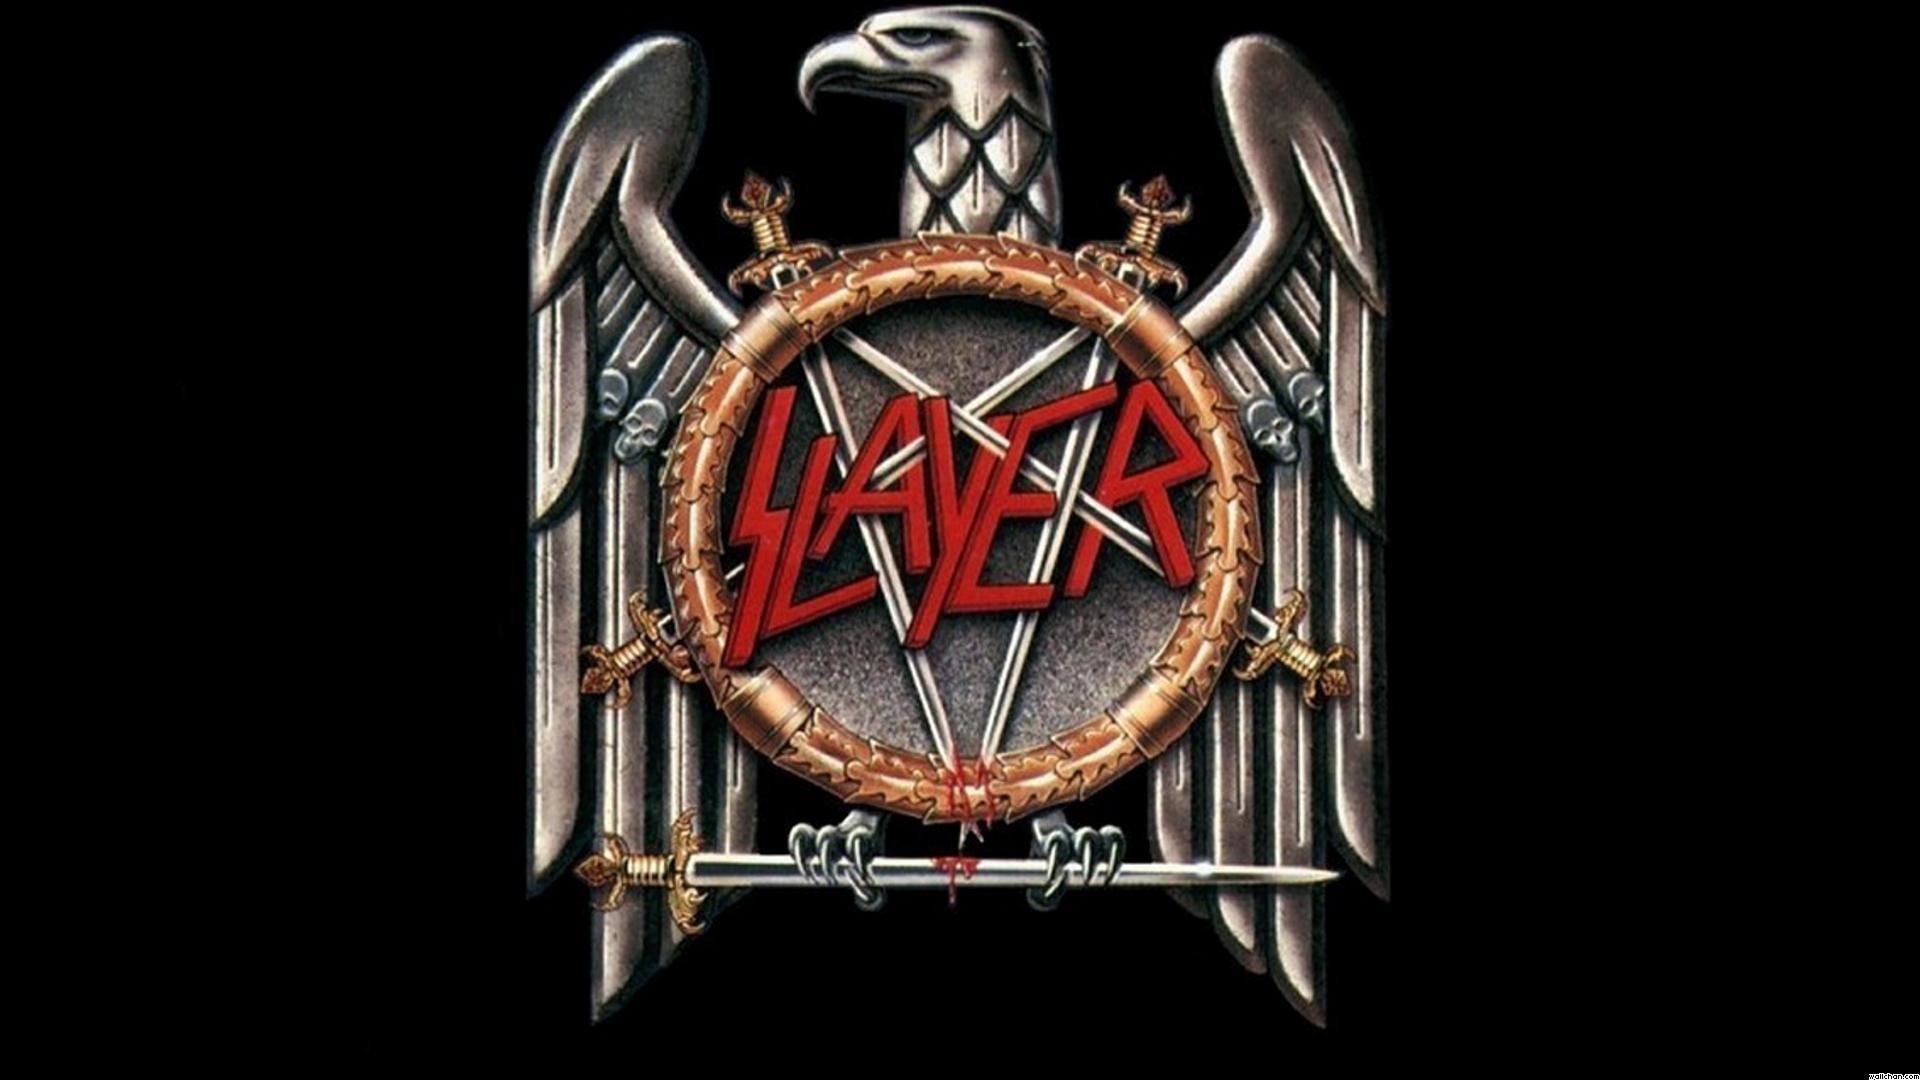 1920x1080 Slayer Groups Bands Music Heavy Metal Hard Rock Album Covers Gallery